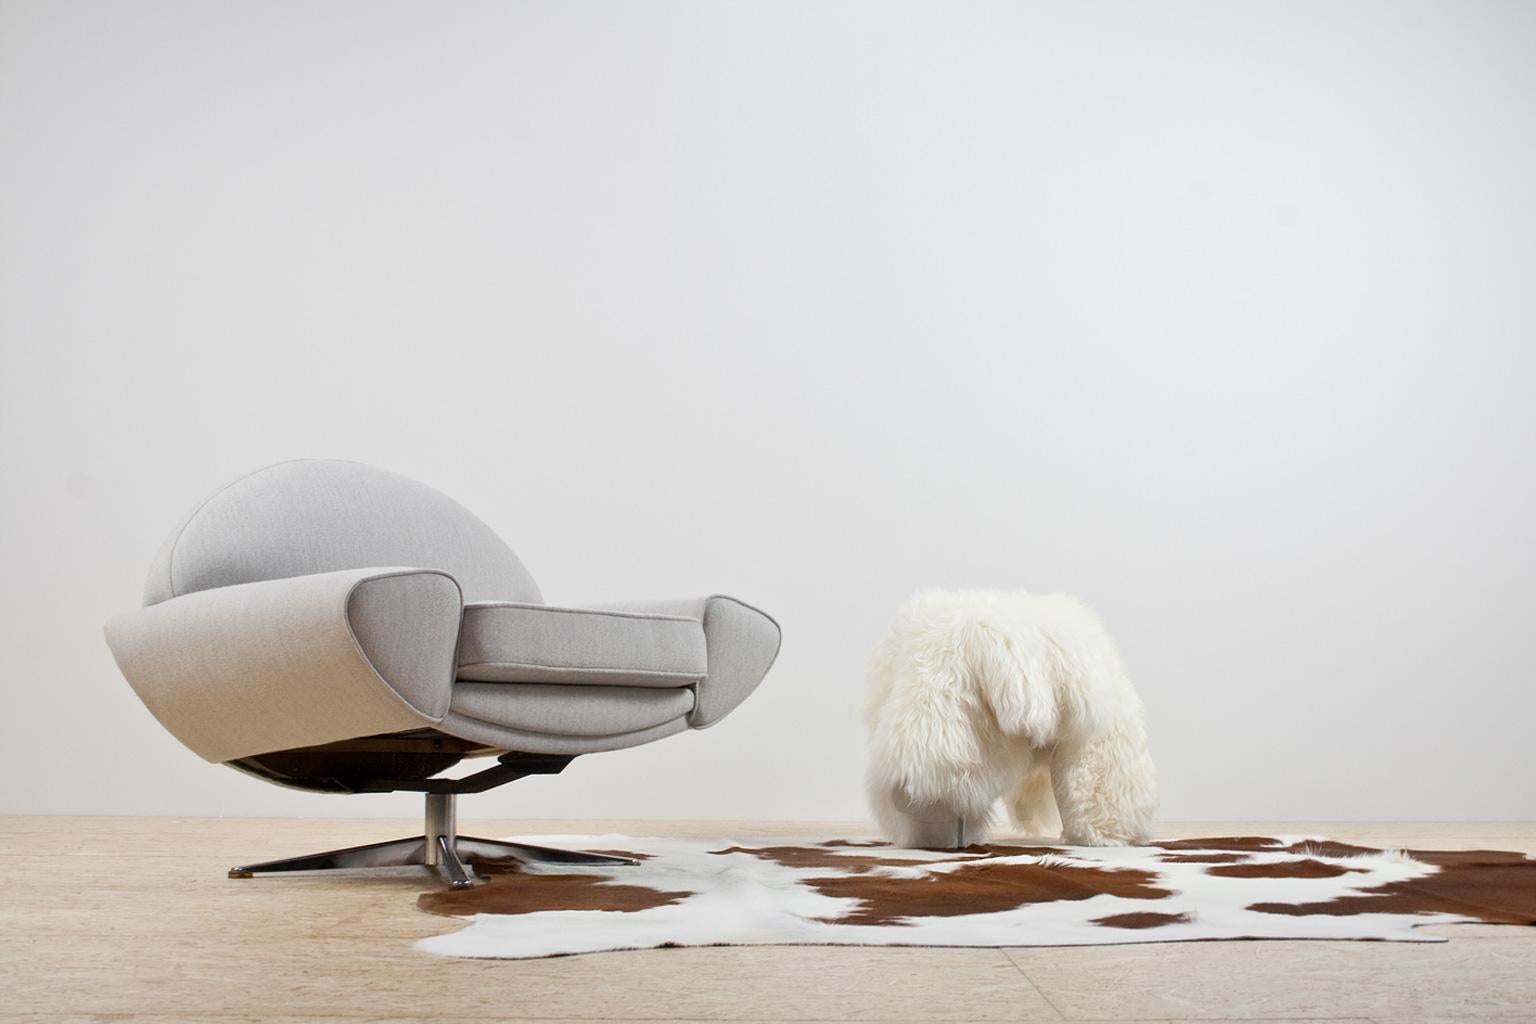 Beautiful Scandinavian Modern 'Capri' lounge, swivel chair designed by Johannes Andersen for Trensum (Sweden) in 1958. The item is re-upholstered in a light grey wool quality fabric, and placed on a chromed swivel frame.

Johannes Andersen (Danish,